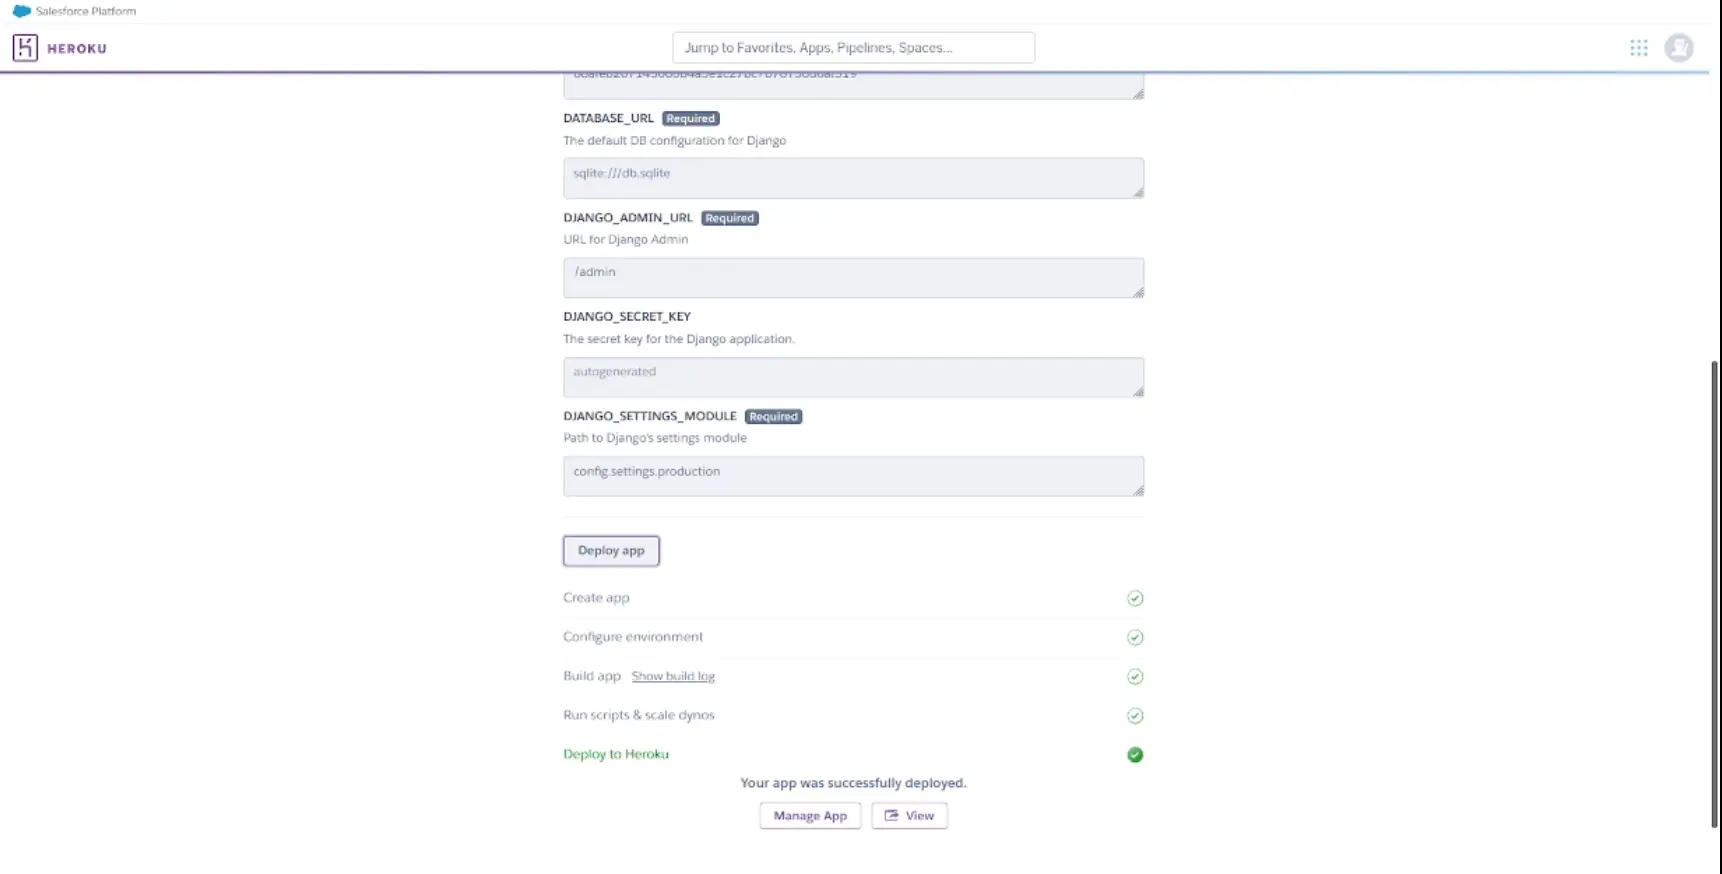 Heroku "deploy app" button at the bottom of the page